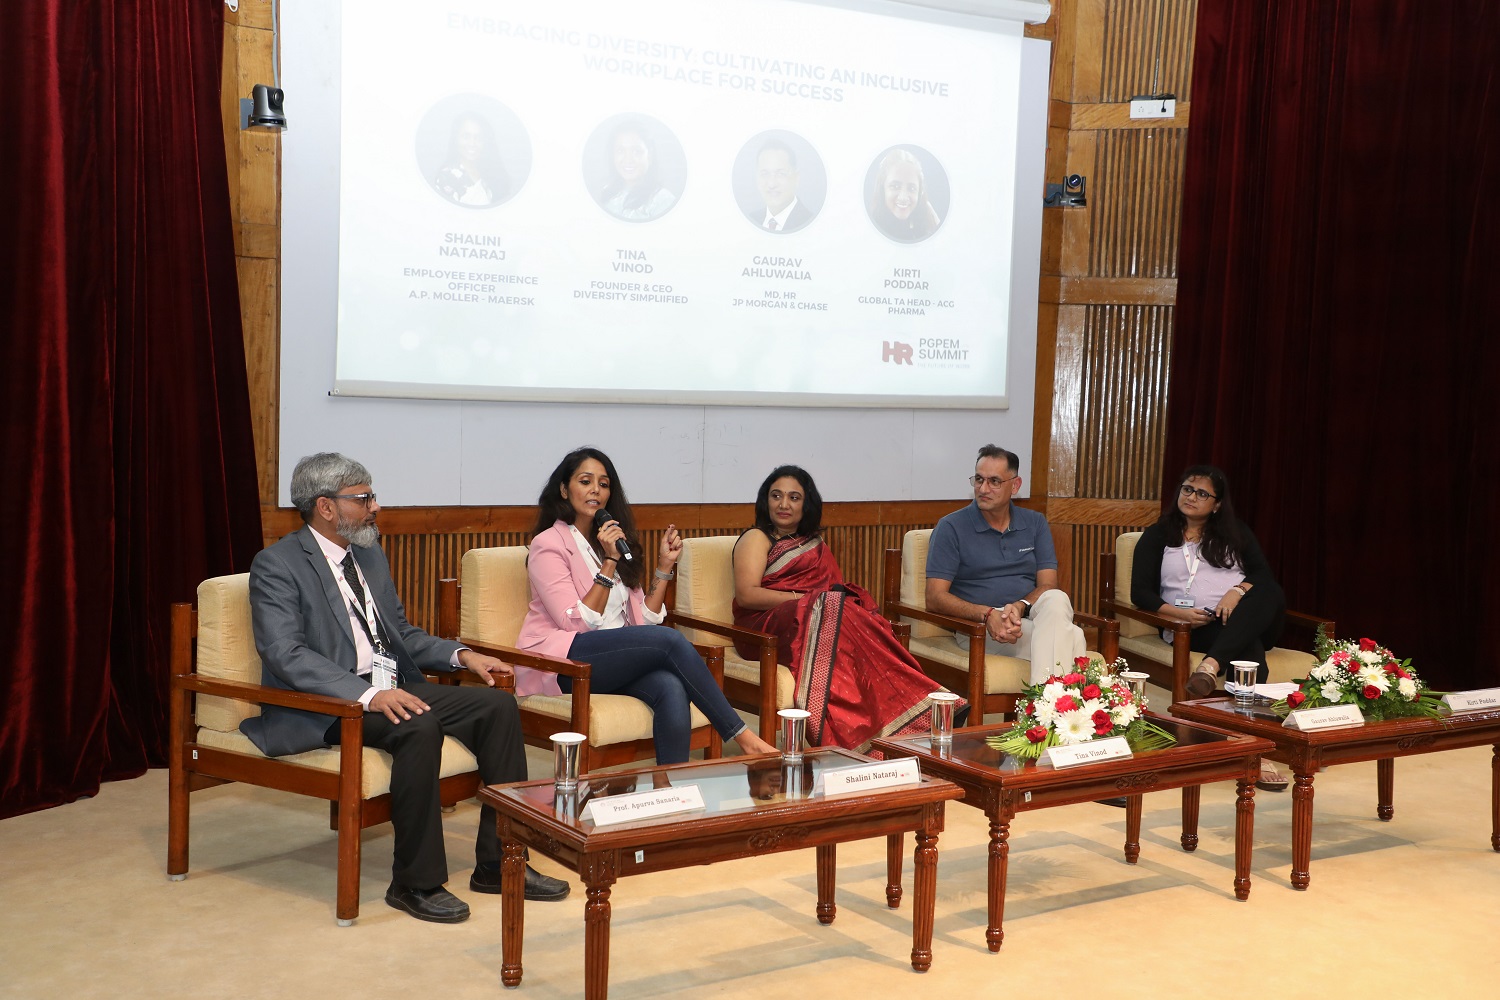 (L-R): Moderator Prof. Apurva Sanariya; Shalini Nataraj, Global Head, HR Transformation & Delivery, A.P. Moller – Maersk; Tina Vinod, Founder and CEO, Diversity Simplified; Gaurav Ahluwalia, MD, Human Resources, JPMorgan Chase, and Kirti Poddar, Global Talent Acquisition Head, ACG World, at the panel discussion on, ‘Embracing Diversity: Cultivating an Inclusive Workplace for Success’.